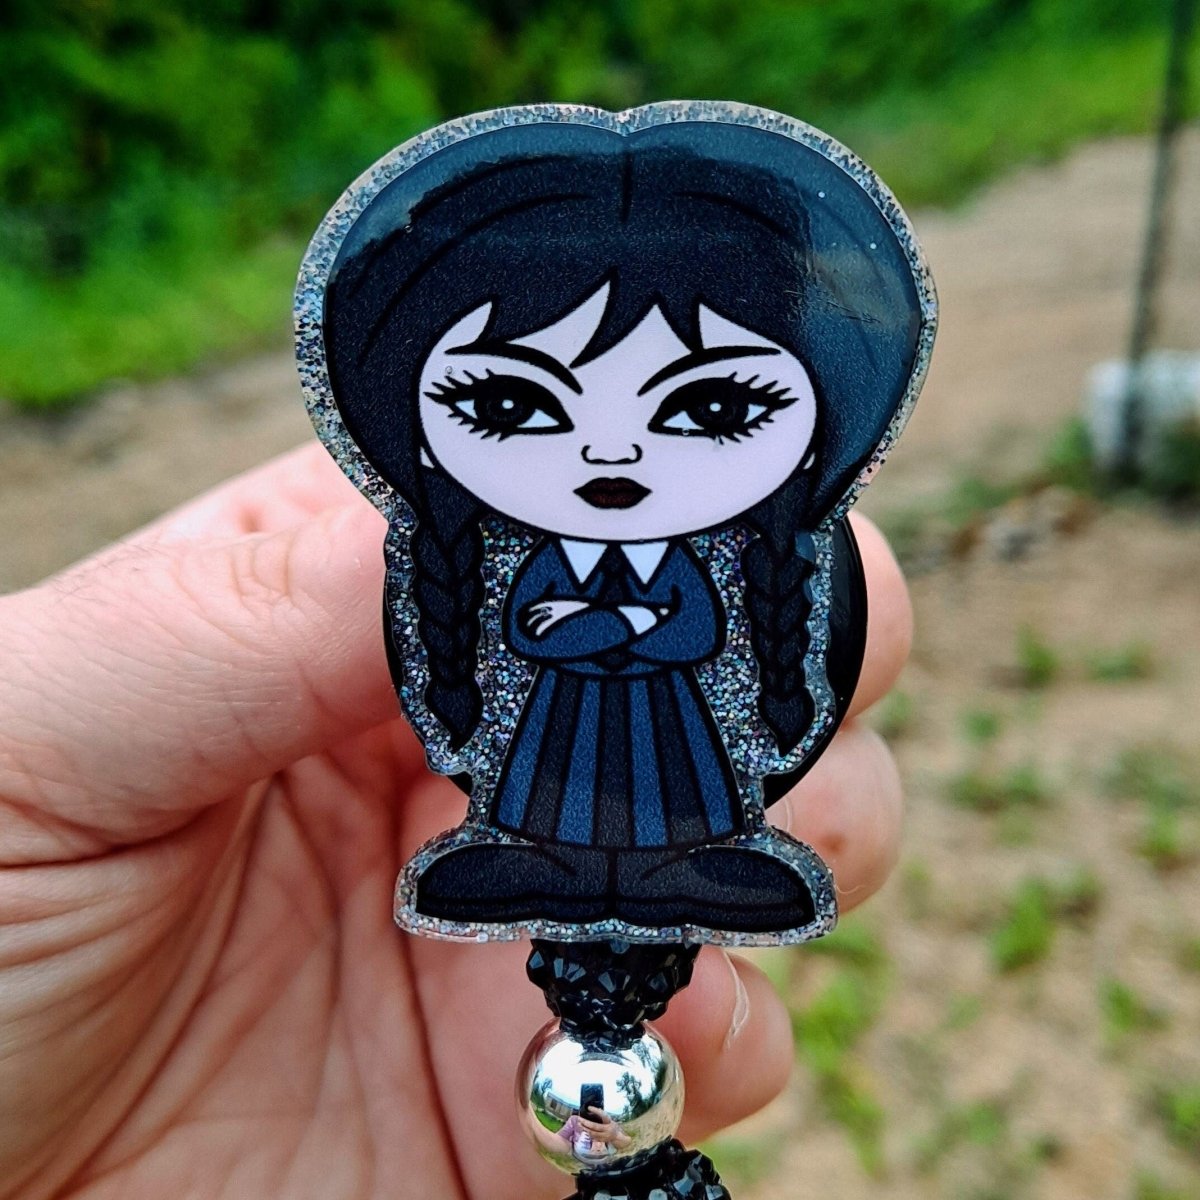 Wednesday Addams Work Id Badge Reel Holder Clip - The Badge Boutique Co